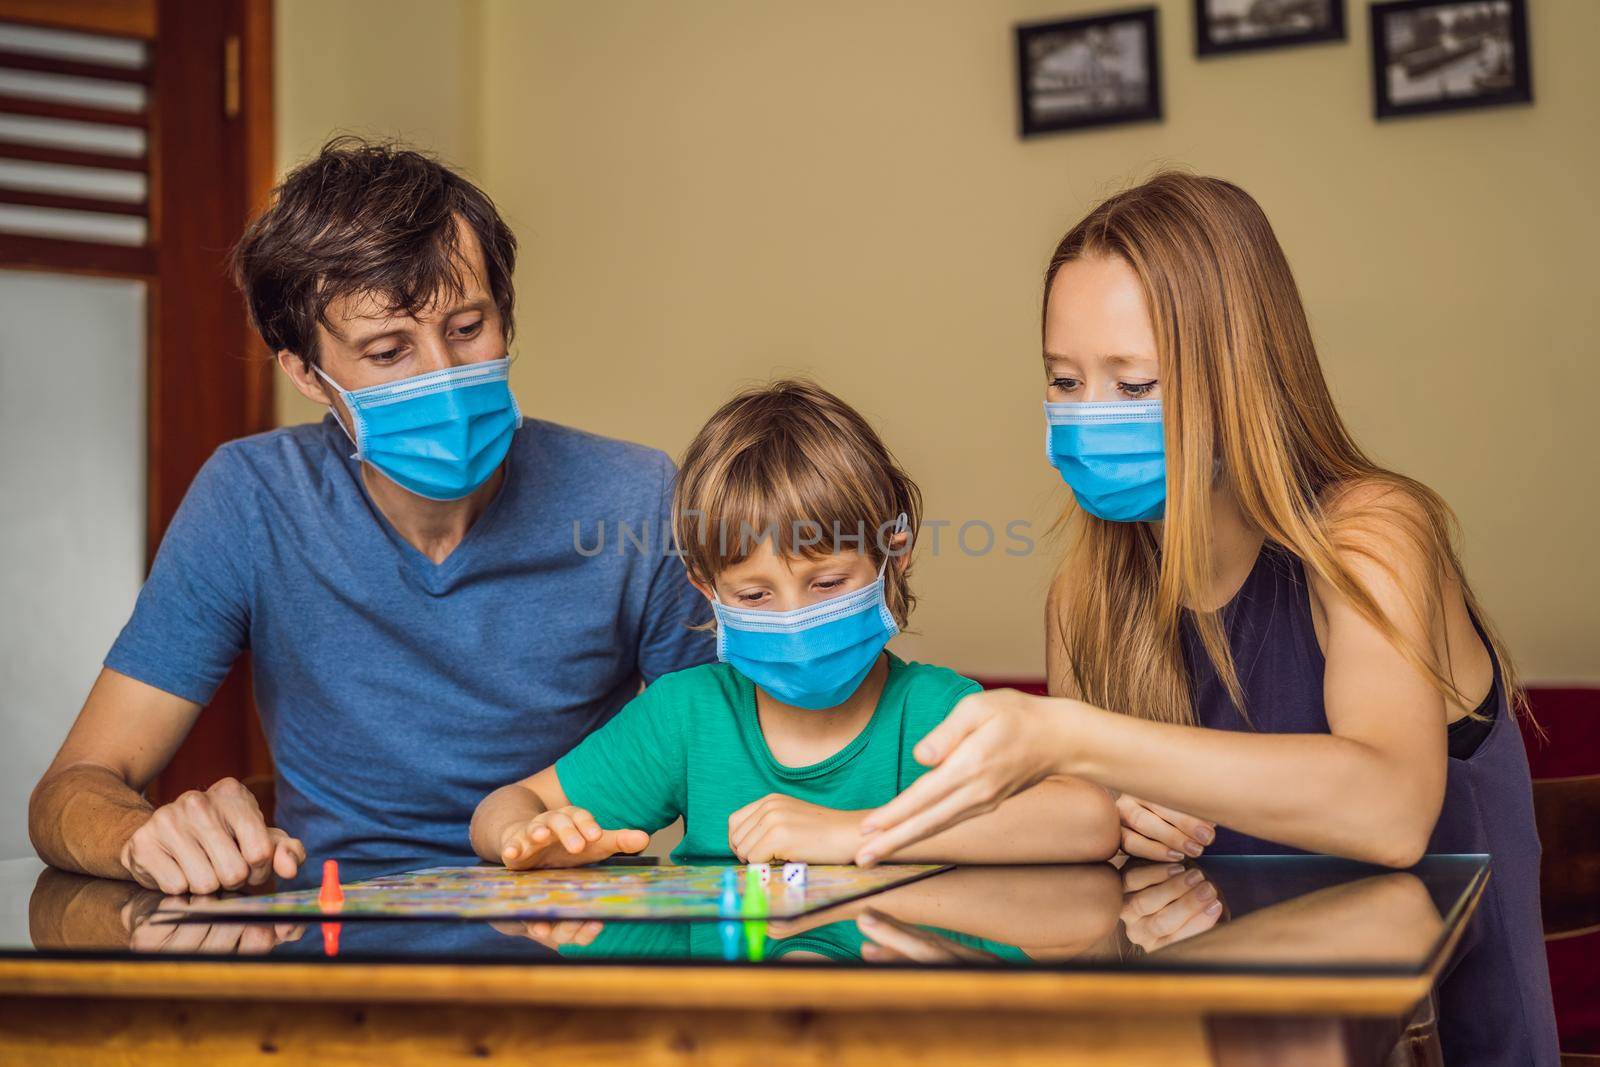 Happy Family Playing Board Game At Home. Stay at home due to quarantine. Coronovirus infection.